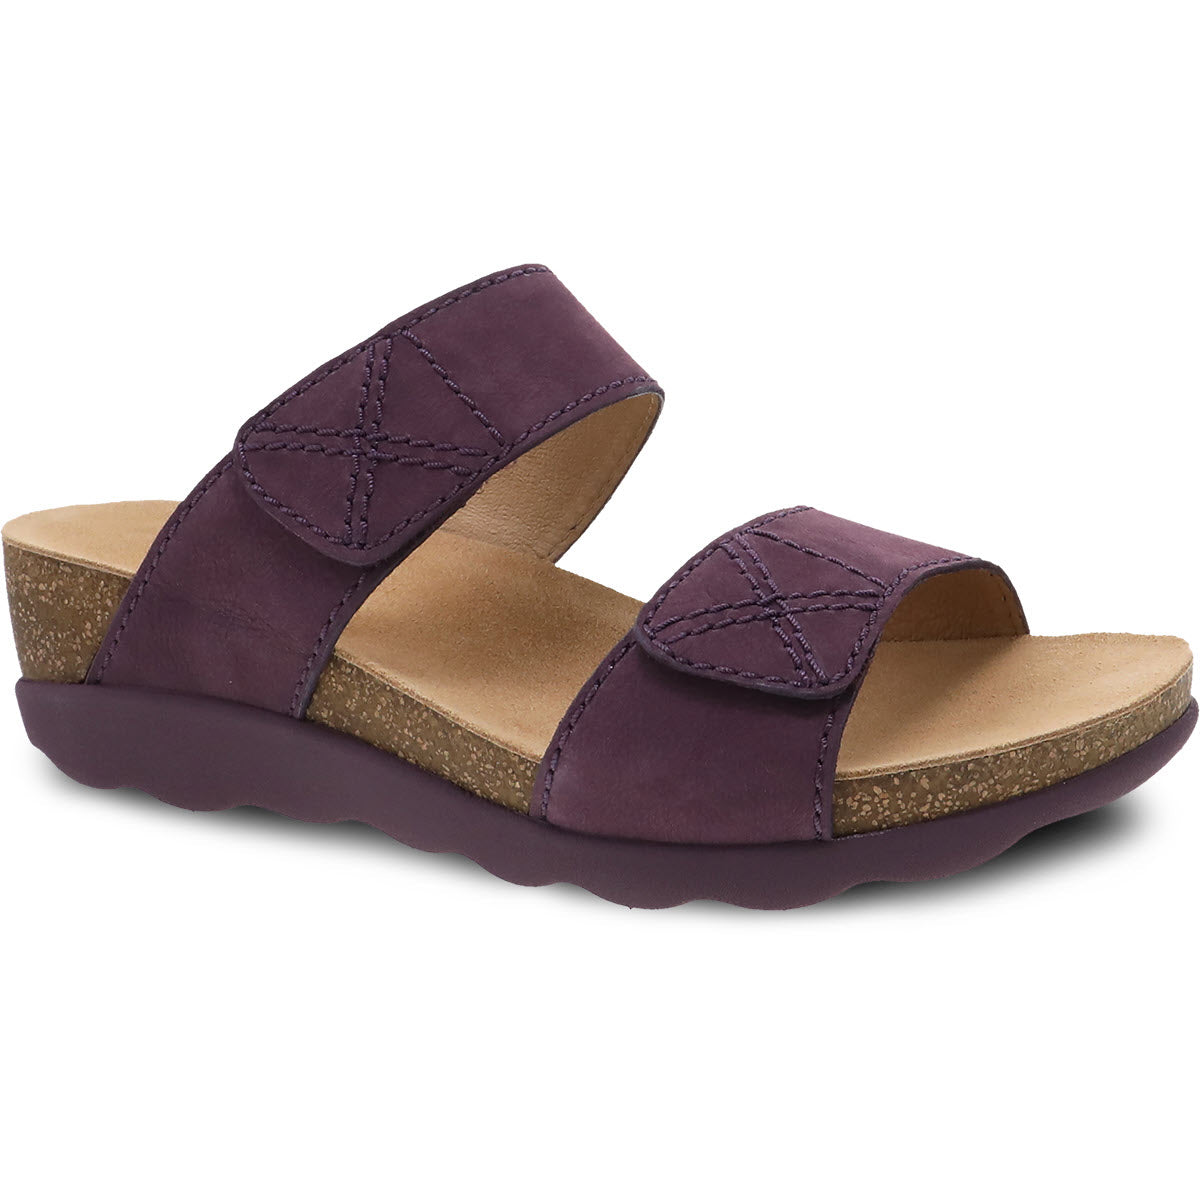 A pair of Dansko Maddy Purple Nubuck Women&#39;s wedge sandals with double velcro straps on a white background.